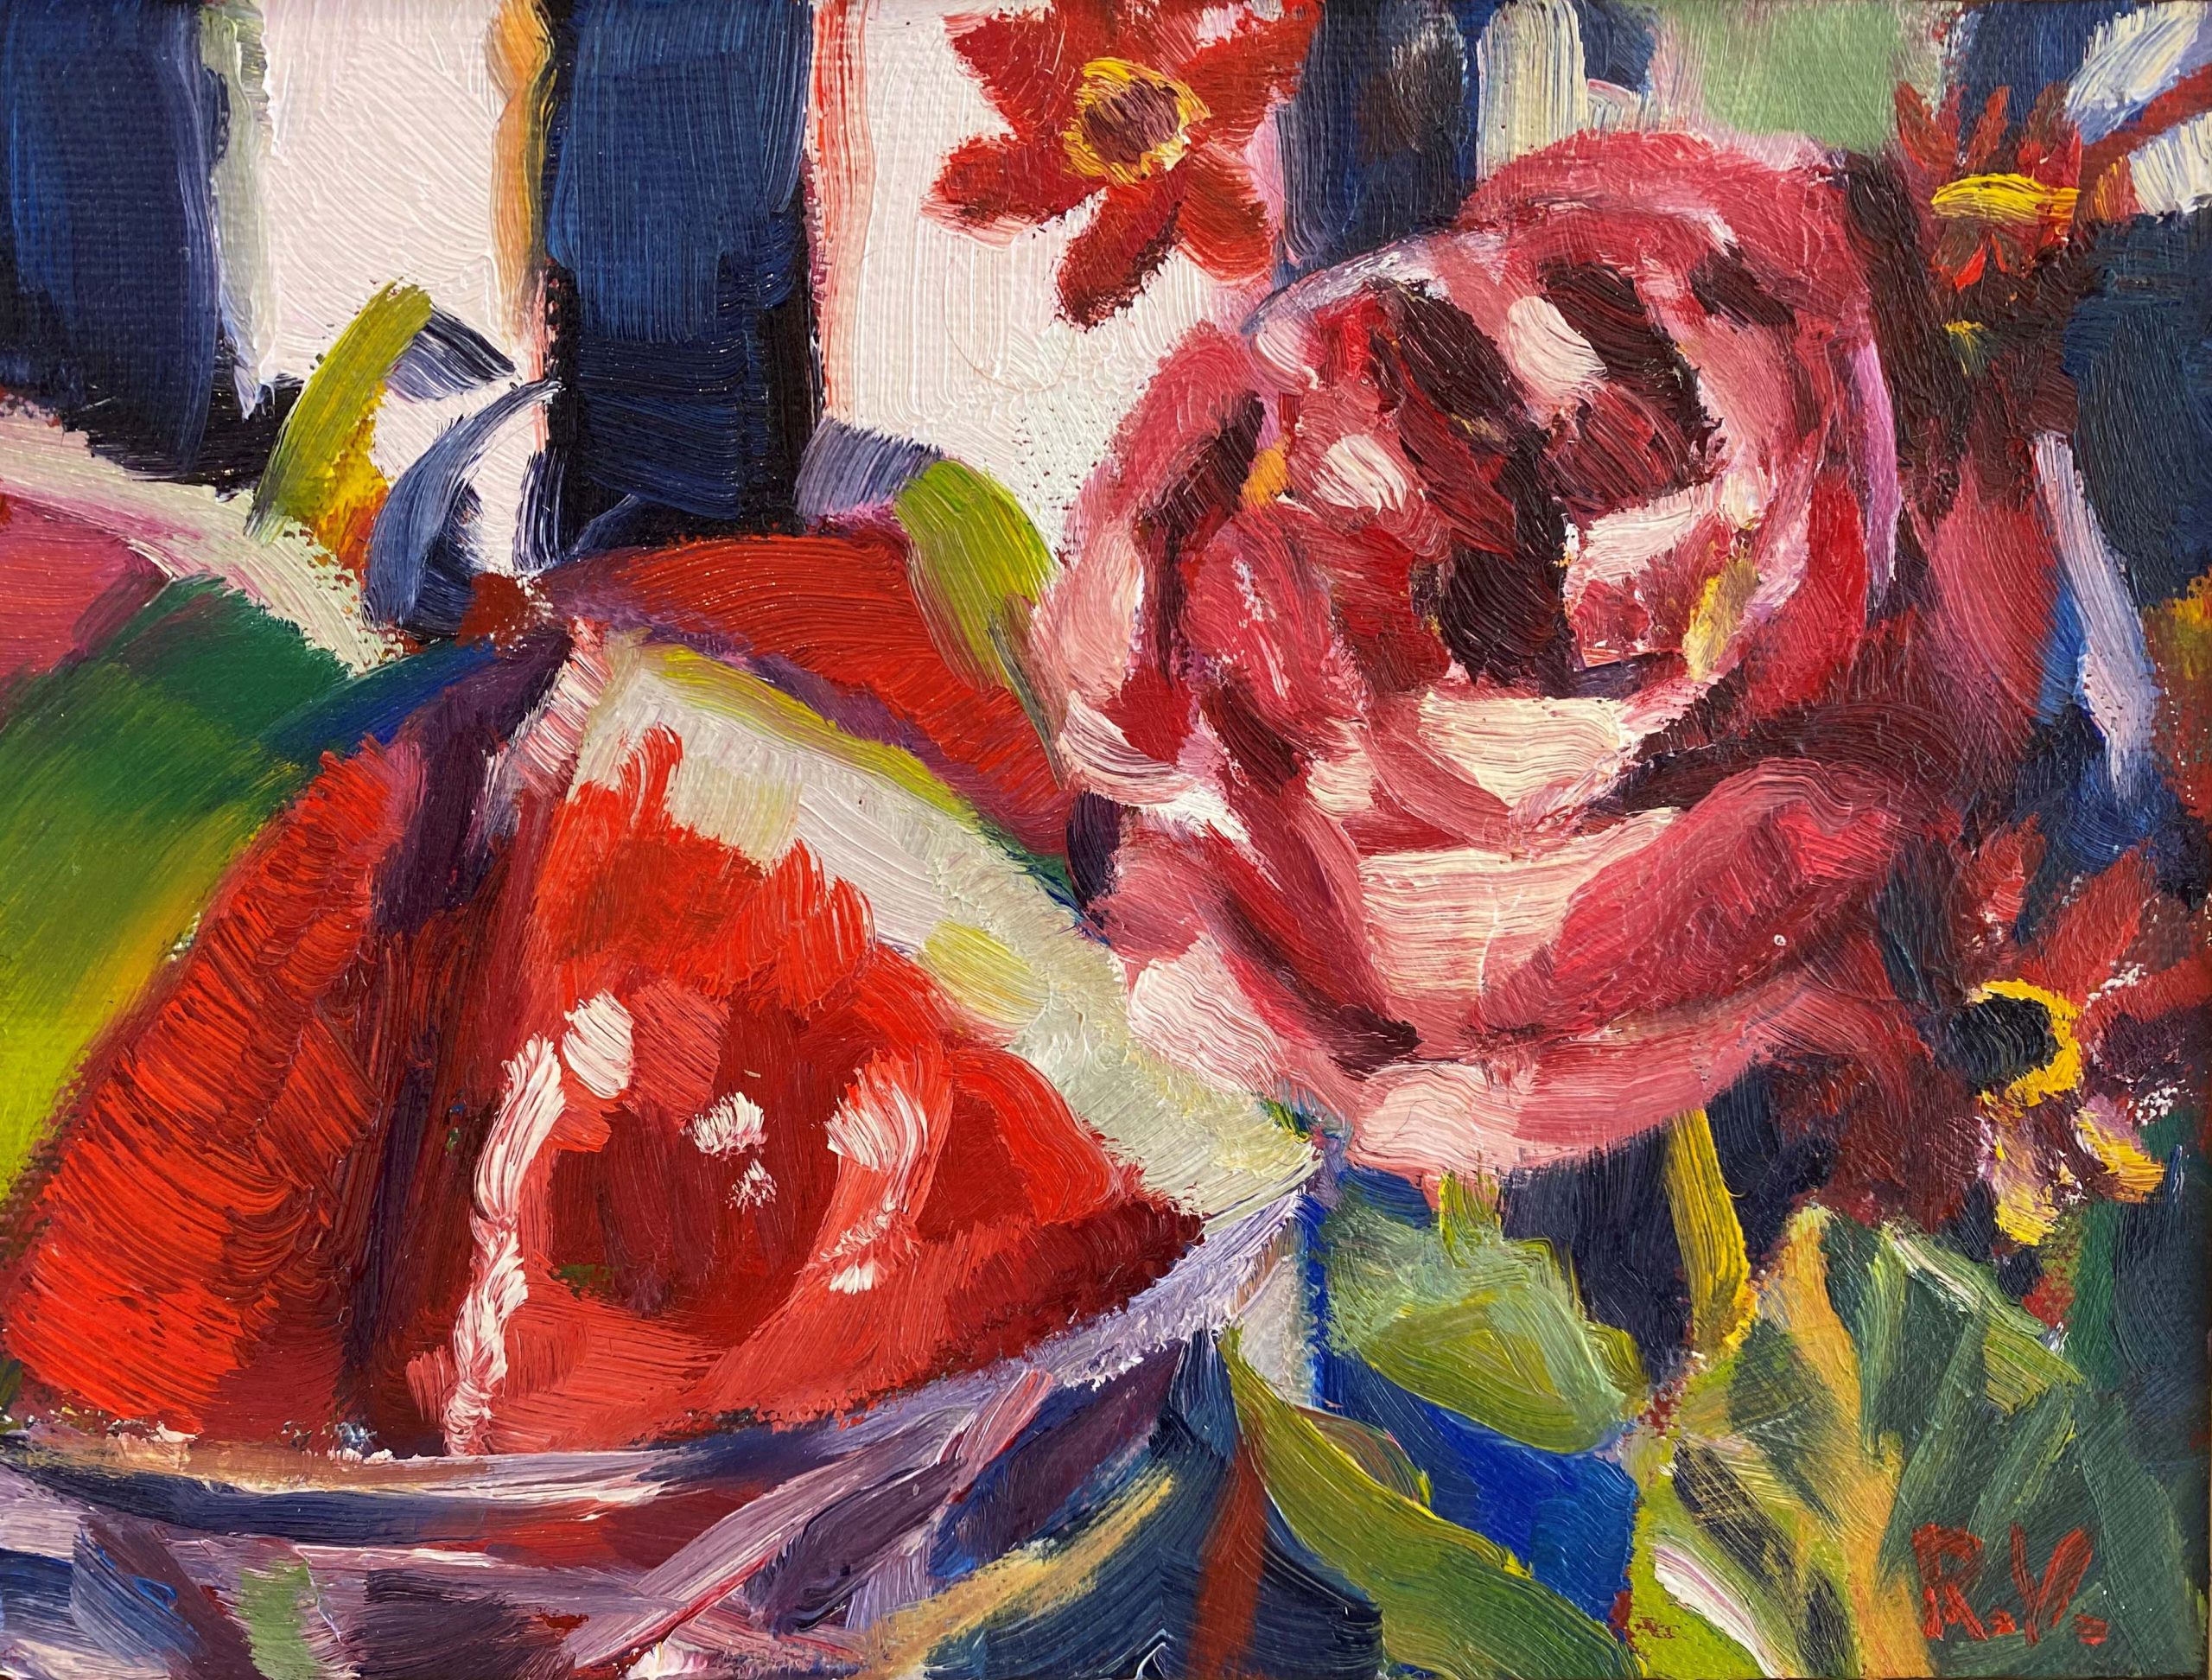 Rosemary Valadon 'Watermelon and Rose' oil on board 60 x 21cm $2,300